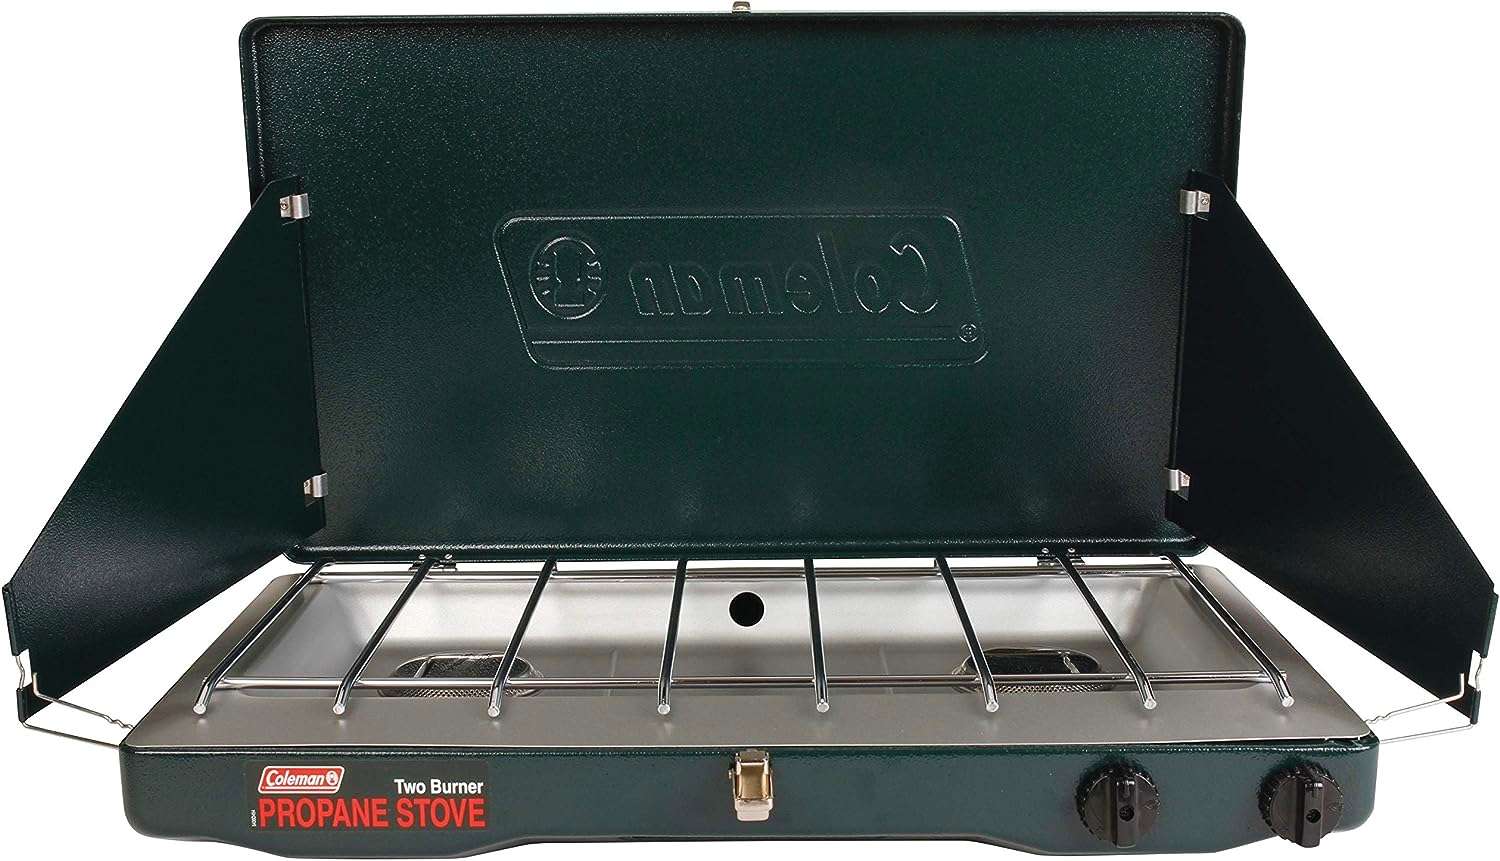 Coleman Classic Propane Stove, 2 Burner - Reliable Portable Gas Camping Stove for Outdoor Cooking, Easy-to-Use and Durable